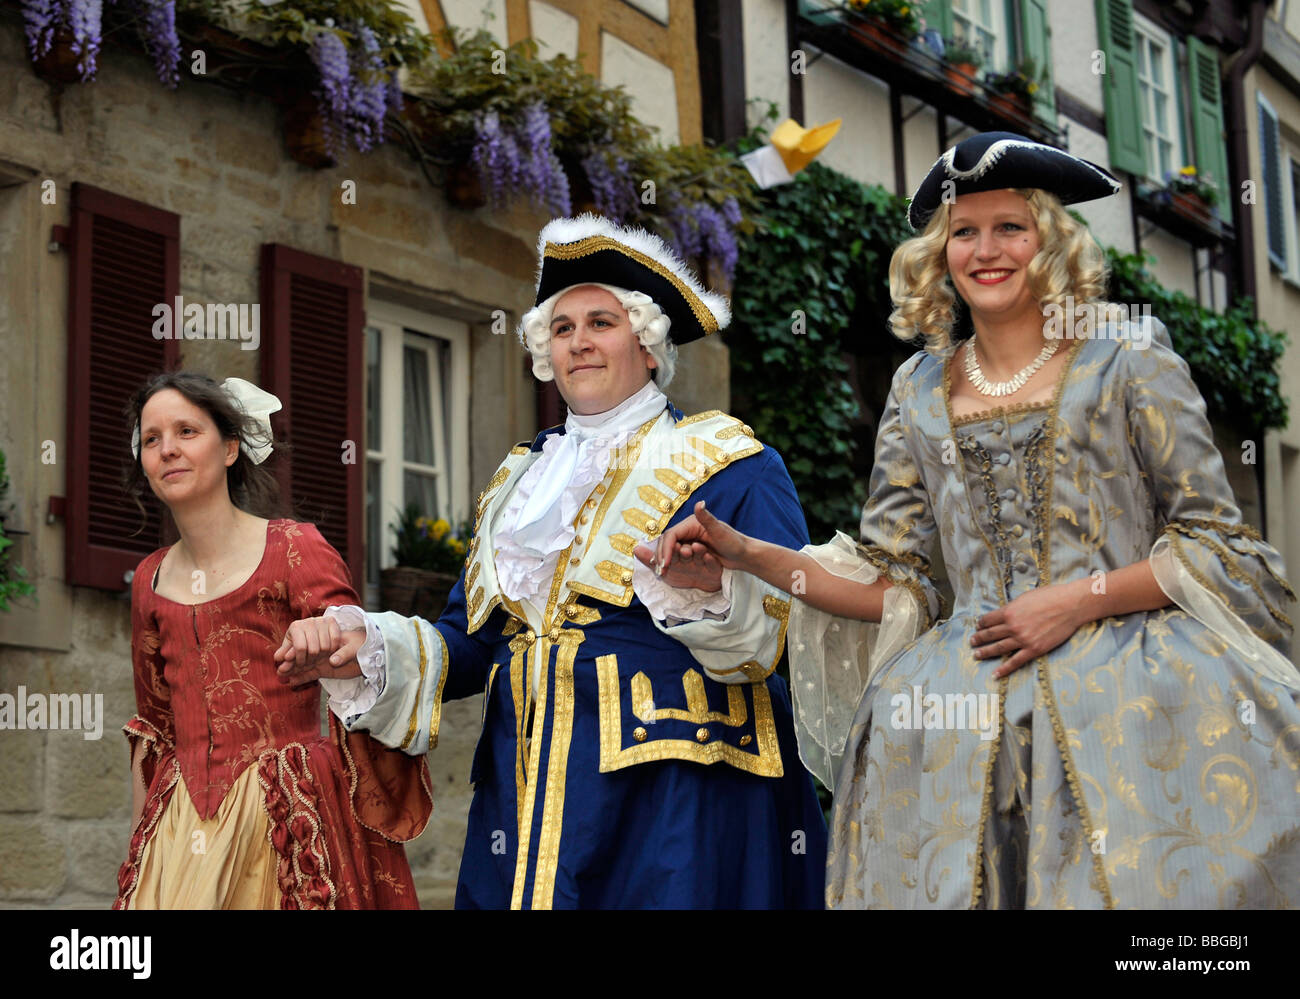 Life in the Baroque period of the 18th Century, gentleman with ladies ...